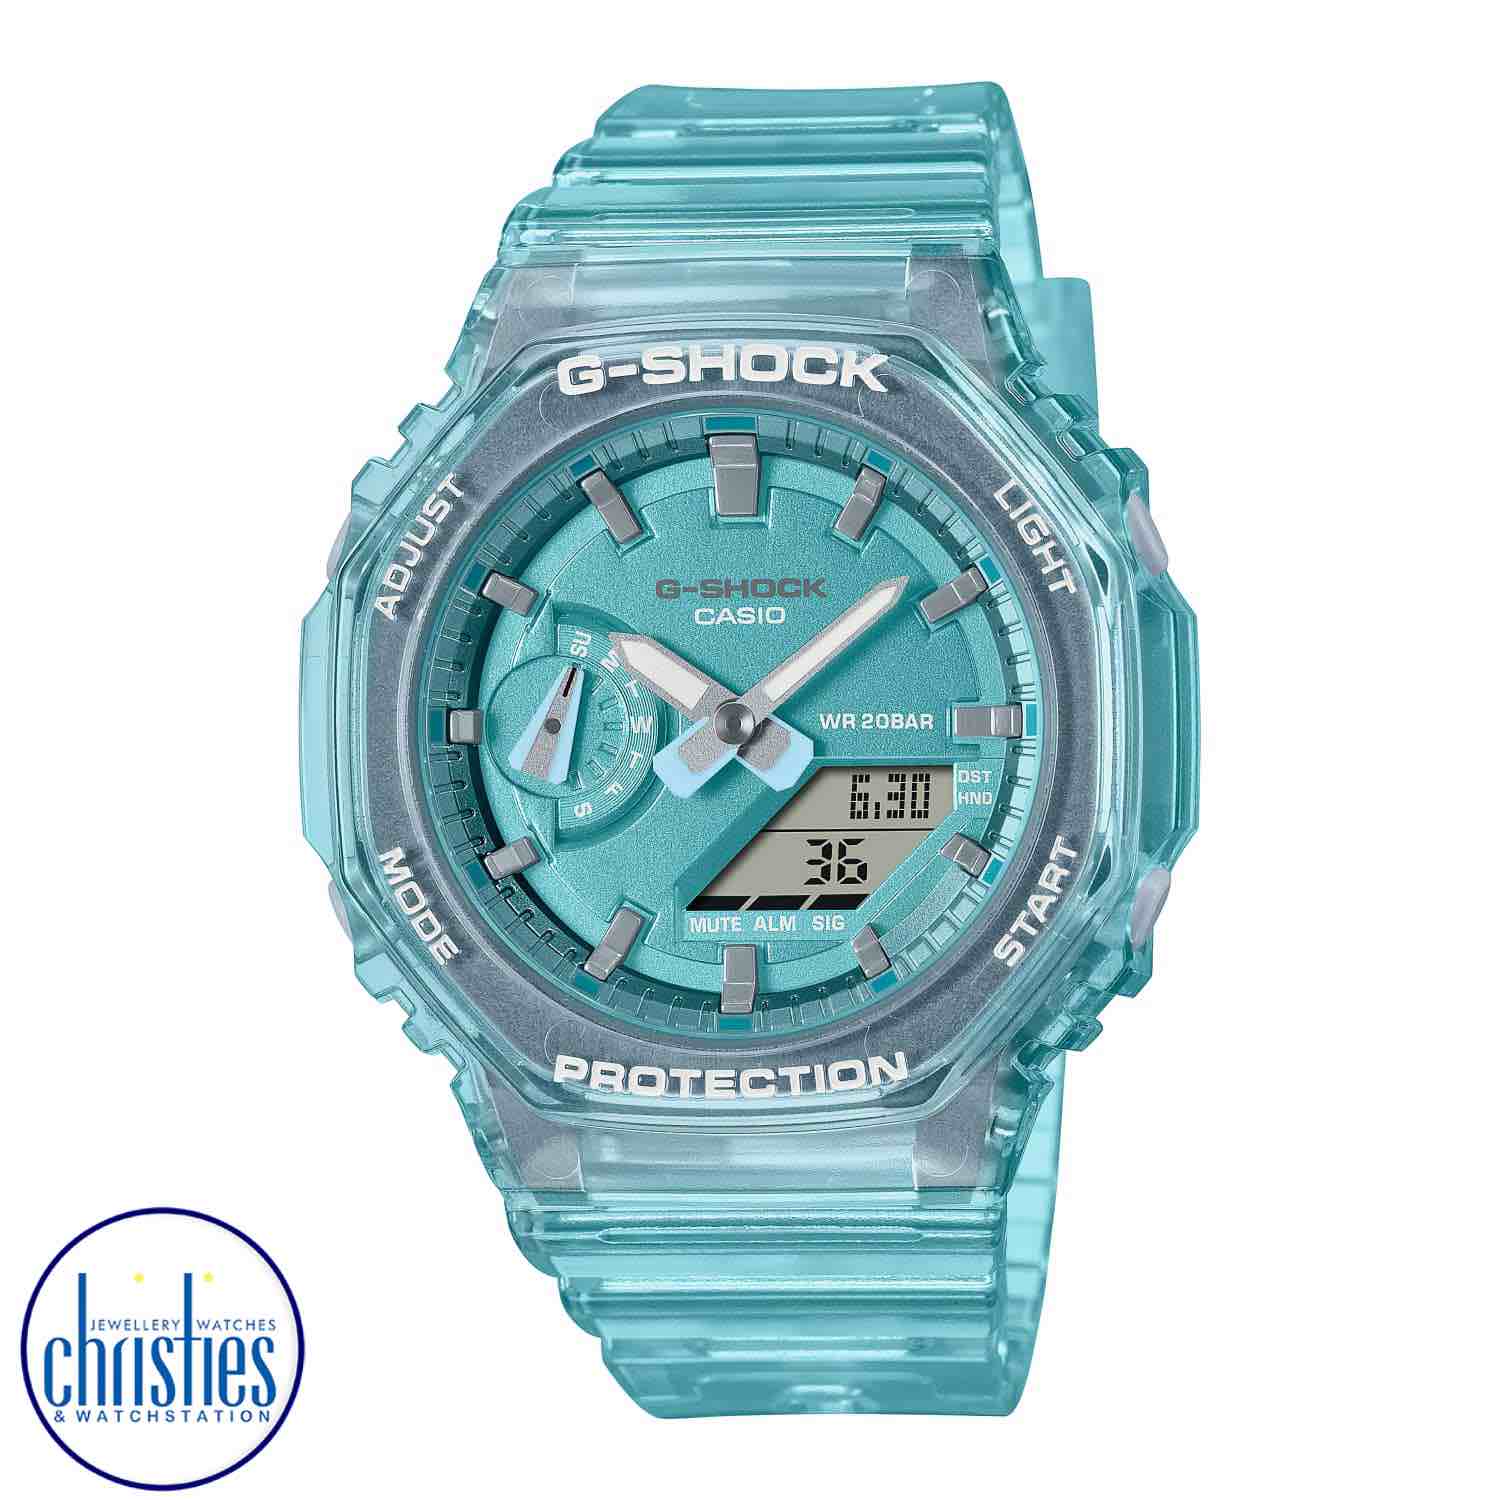 GMAS2100SK-2A G-SHOCK Metallic Translucent Womens Watch. Slip on a splash of clear metallic pleasure with the ever-popular analog-digital combination GA-2100 in a slimmer, more compact profile.